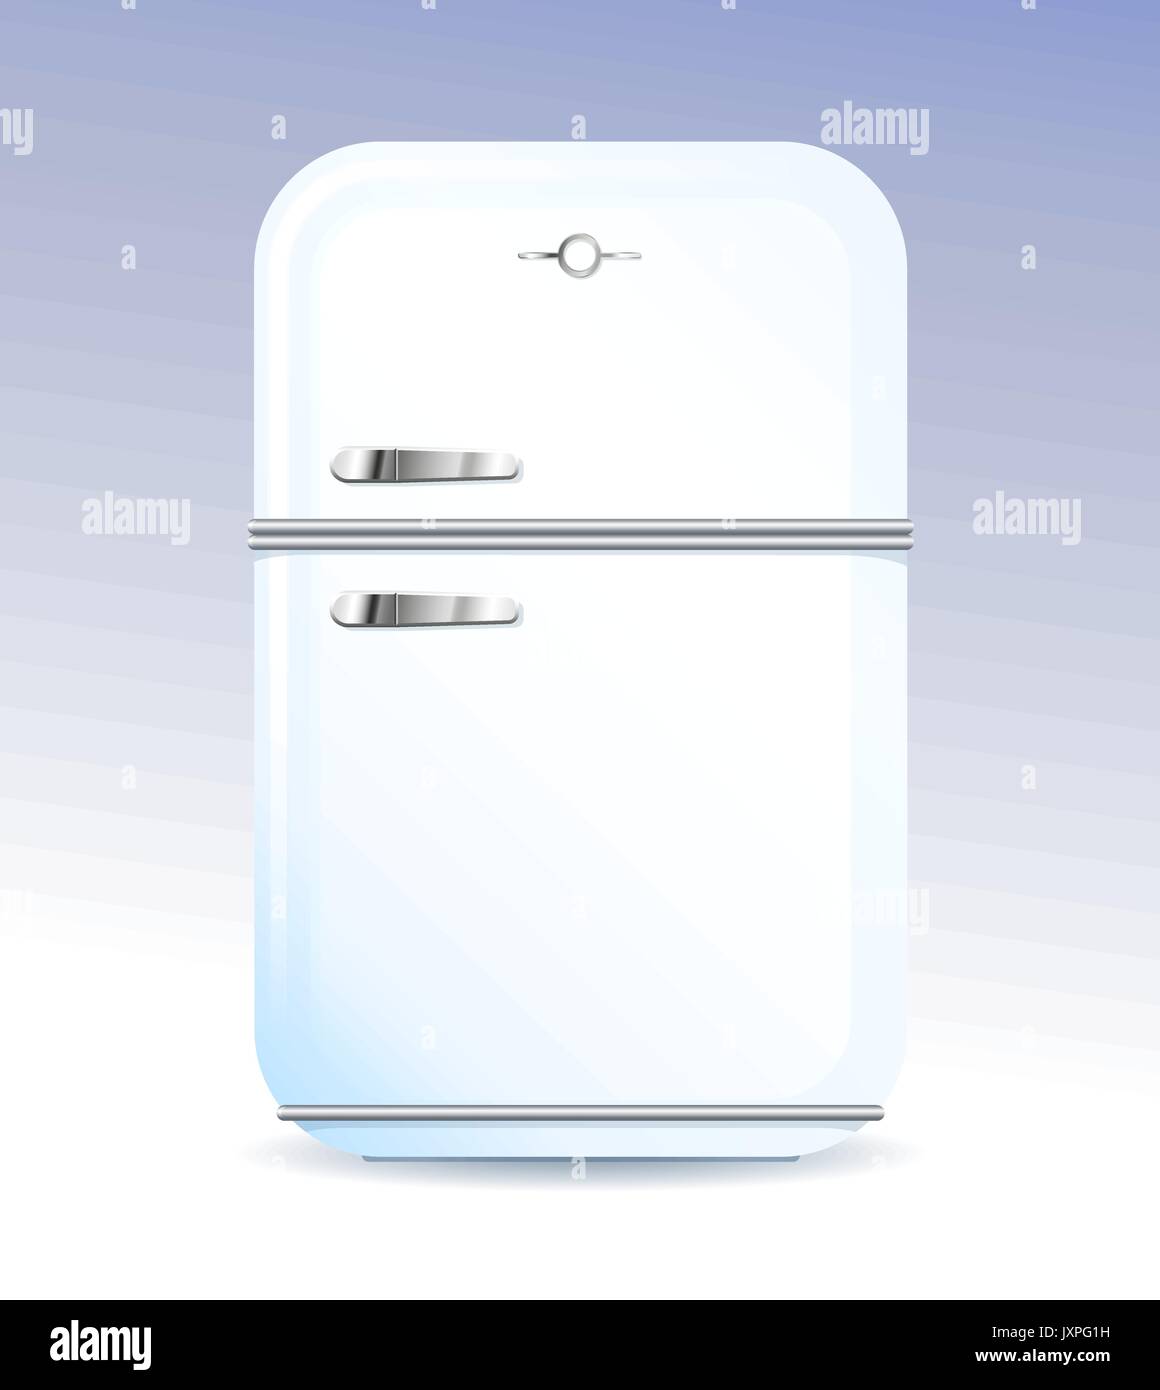 White retro style domestic fridge or refrigerator with freezer compartment on a grey gradient background, vector illustration Stock Vector